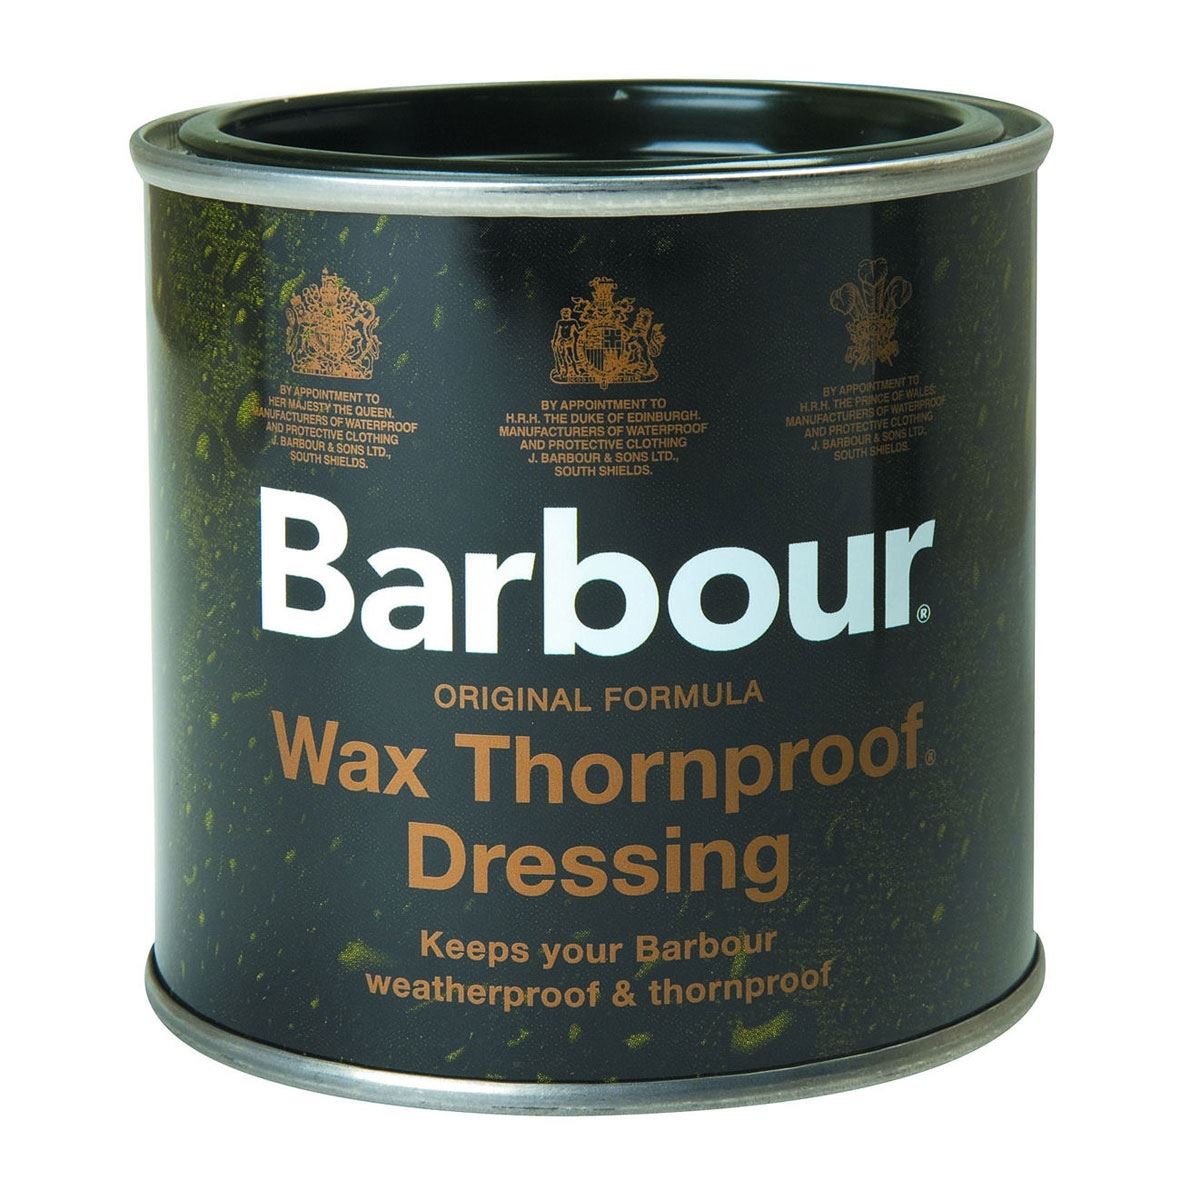 What does the Barbour Wax Thornproof Dressing preserve for Barbour wax?